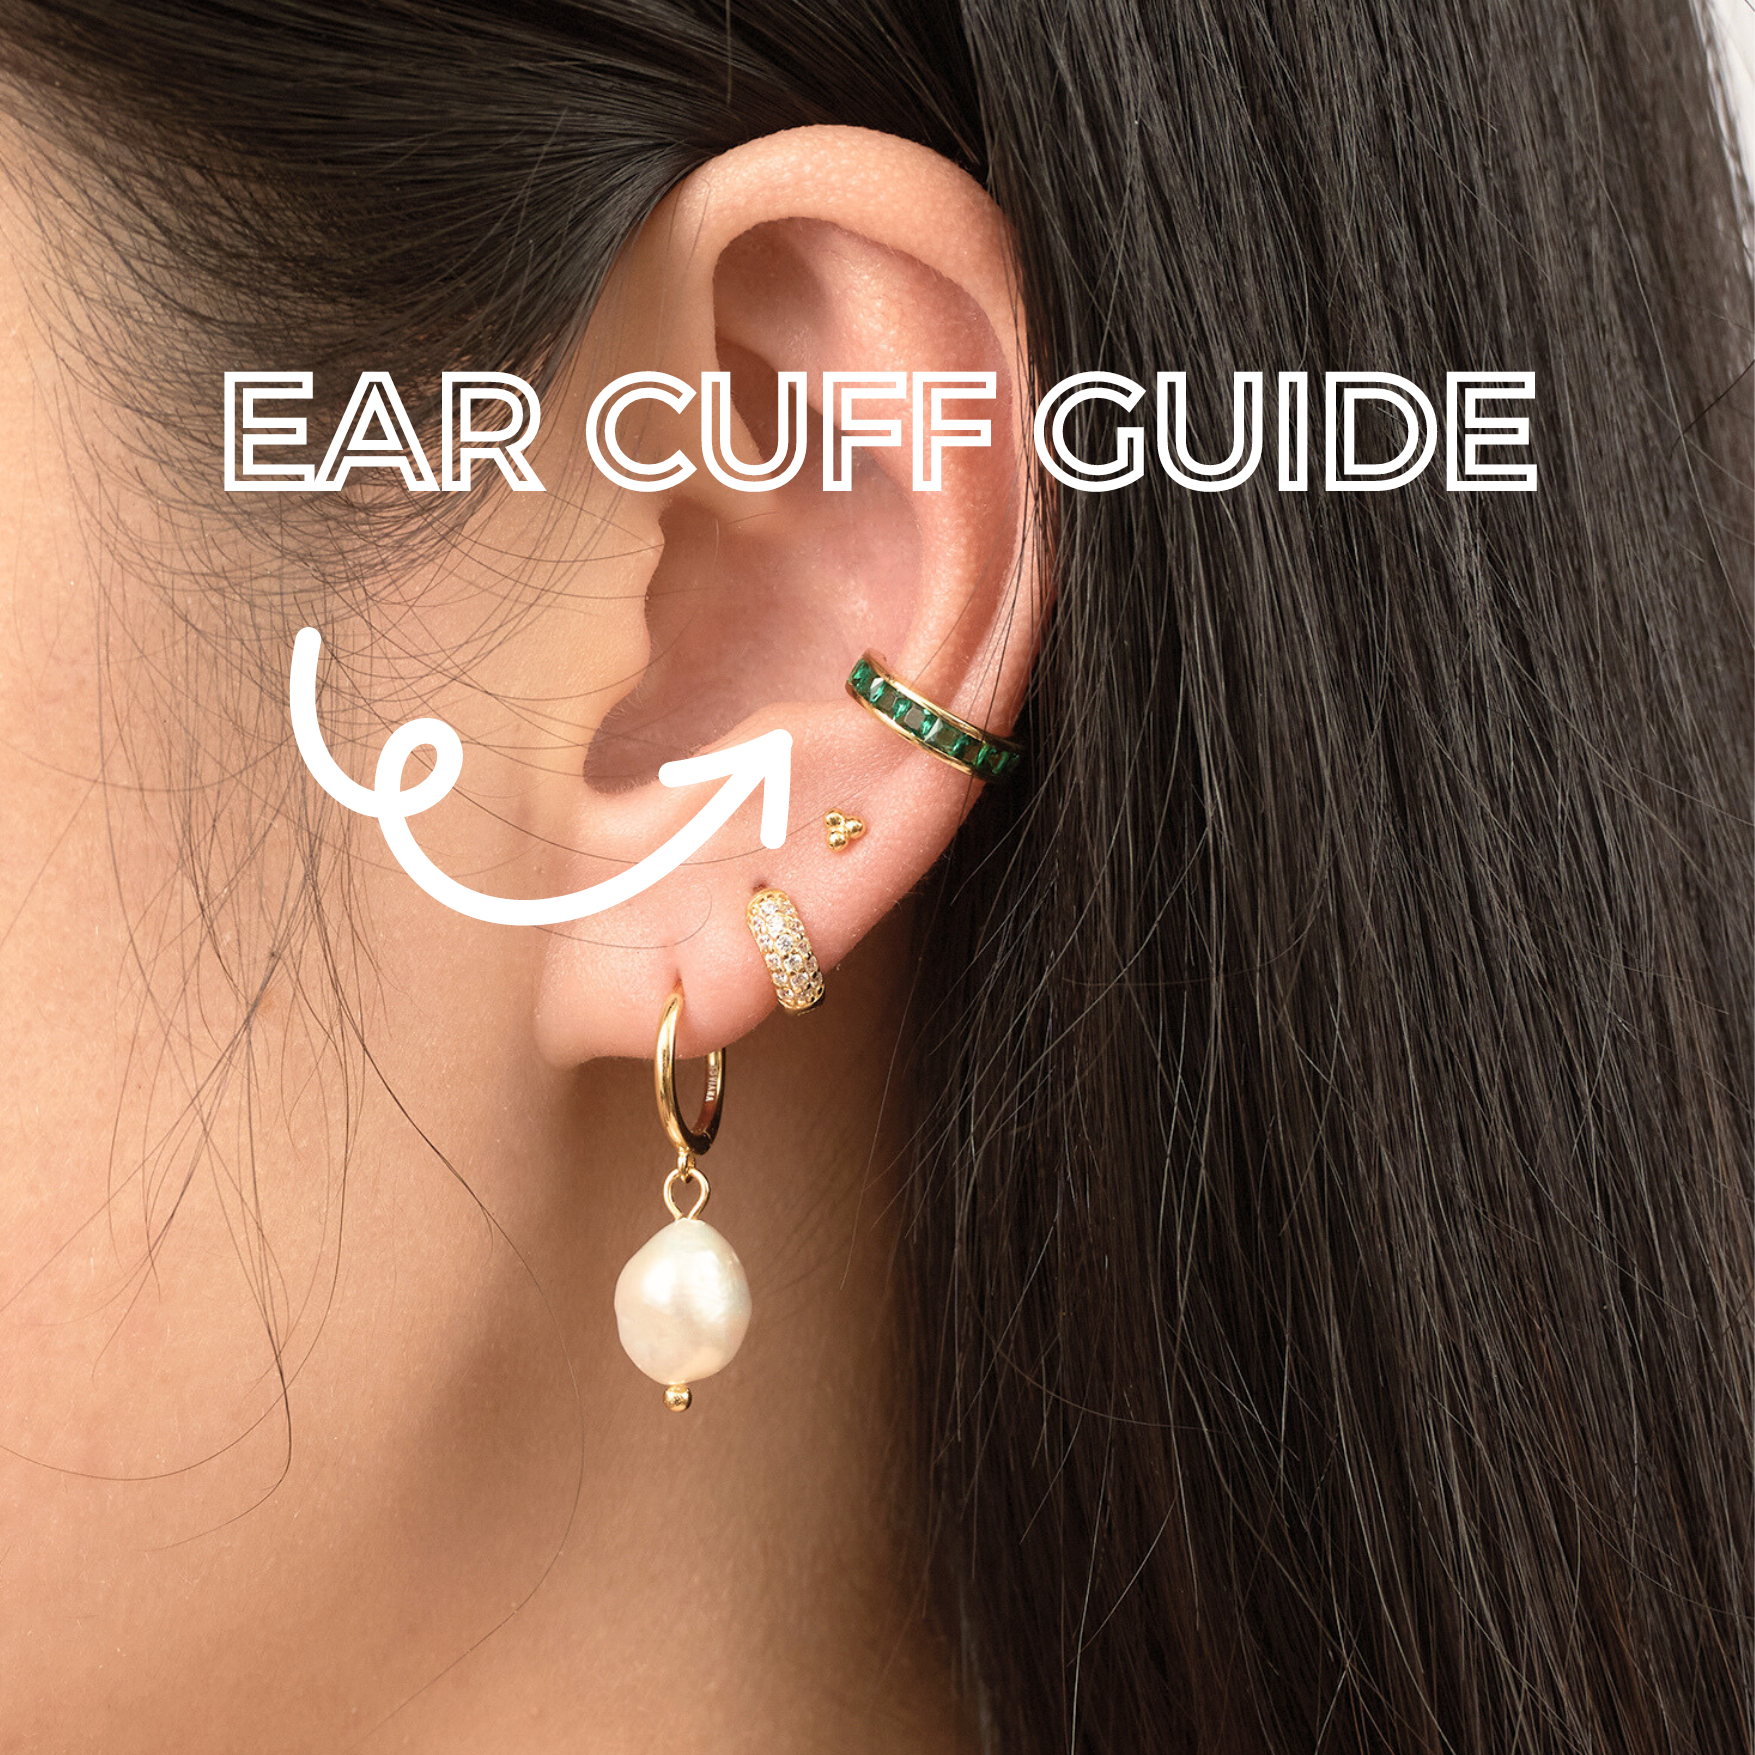 Ear cuff guide, how to wear and remove ear cuff to secure